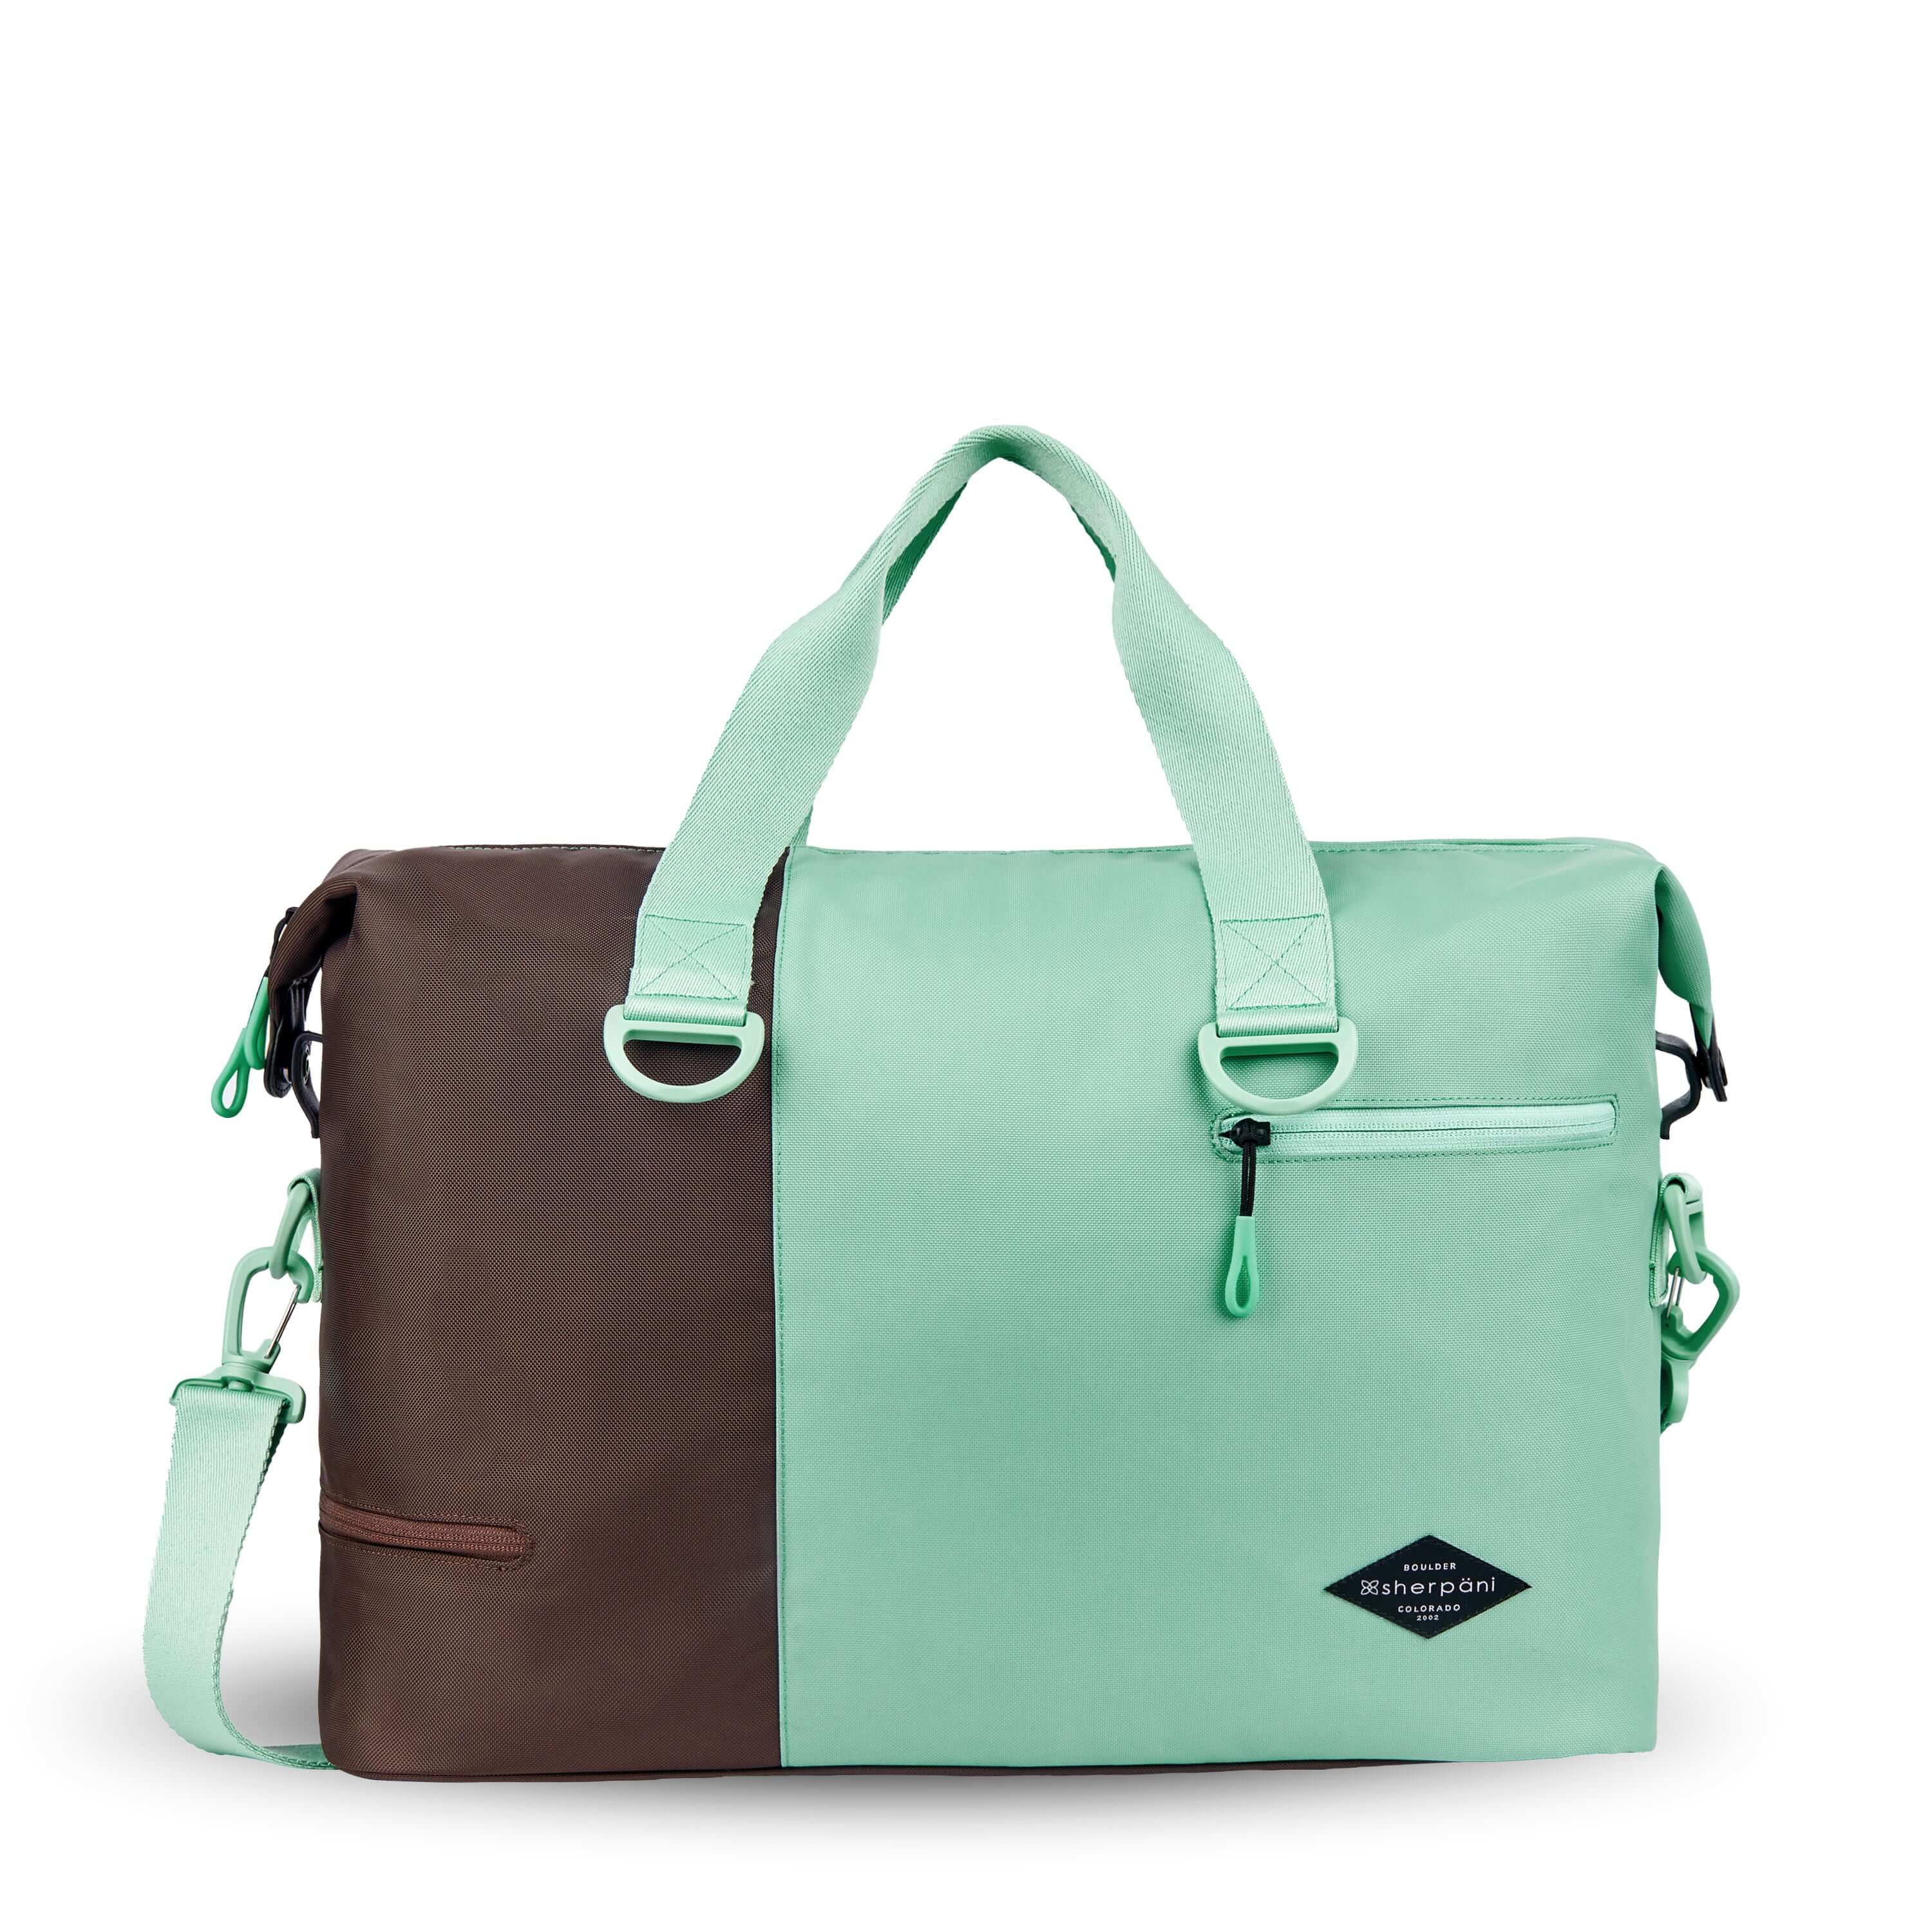 Flat front view of Sherpani bag, the Sola in Seagreen. The bag is two-toned in light green and brown. Two external zipper compartments are visible on the top right and bottom left of the bag. Easy-pull zippers are accented in light green. The bag has tote handles and an adjustable/detachable crossbody strap. 